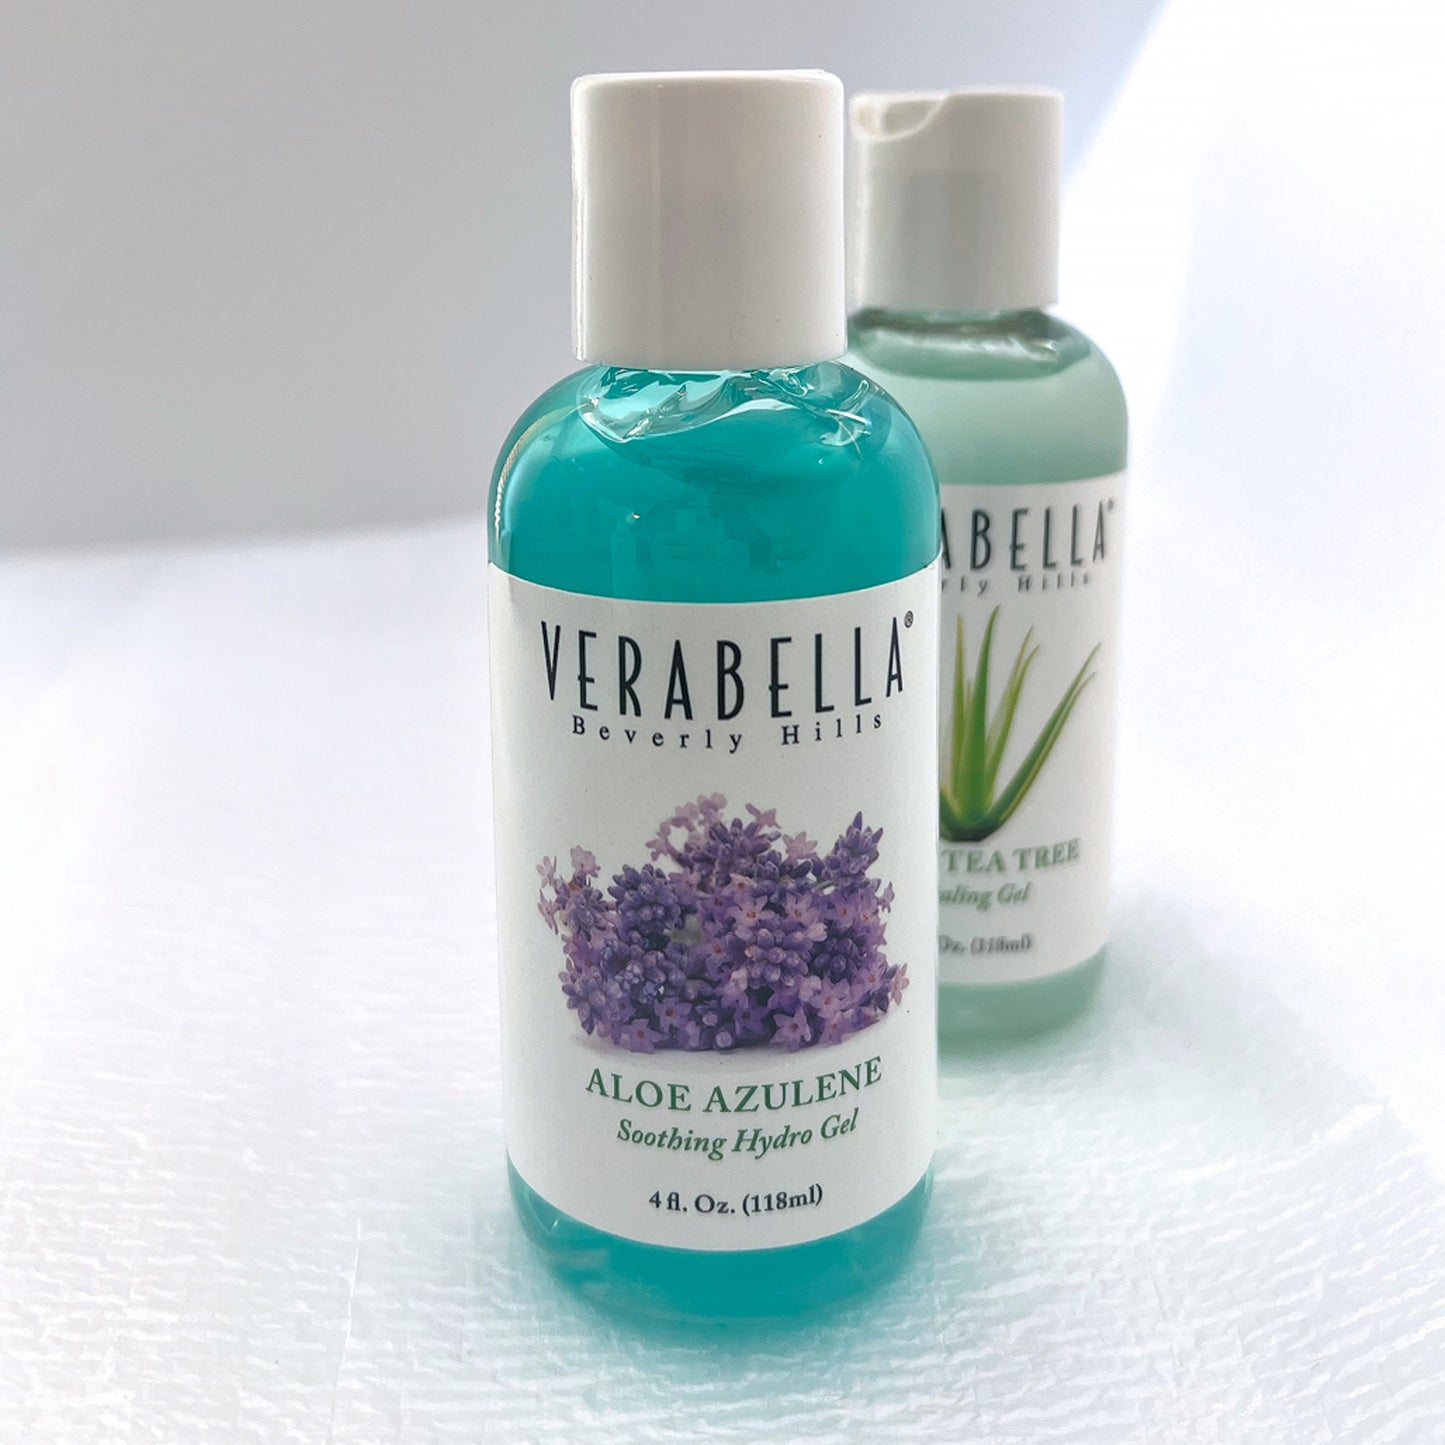 Container - Verabella Aloe Azulene Soothing Hydro Gel - call for details